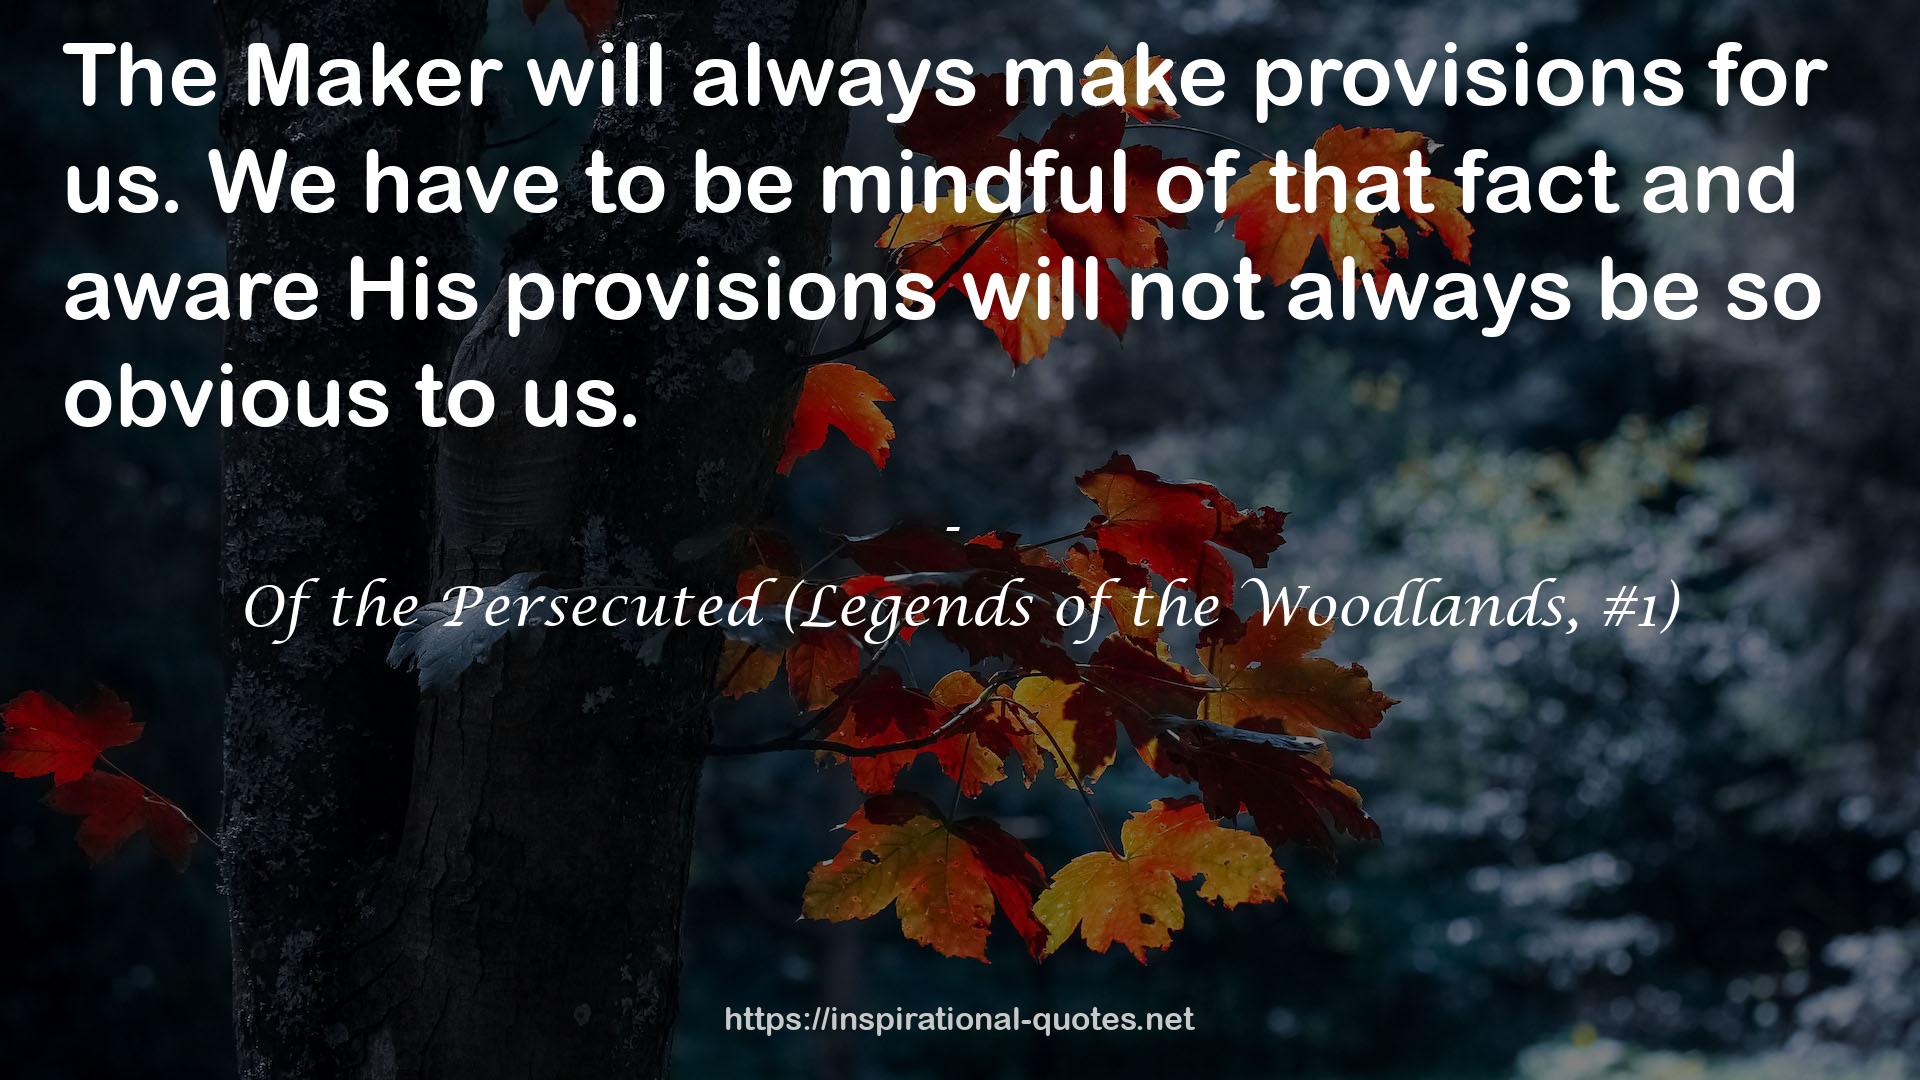 Of the Persecuted (Legends of the Woodlands, #1) QUOTES